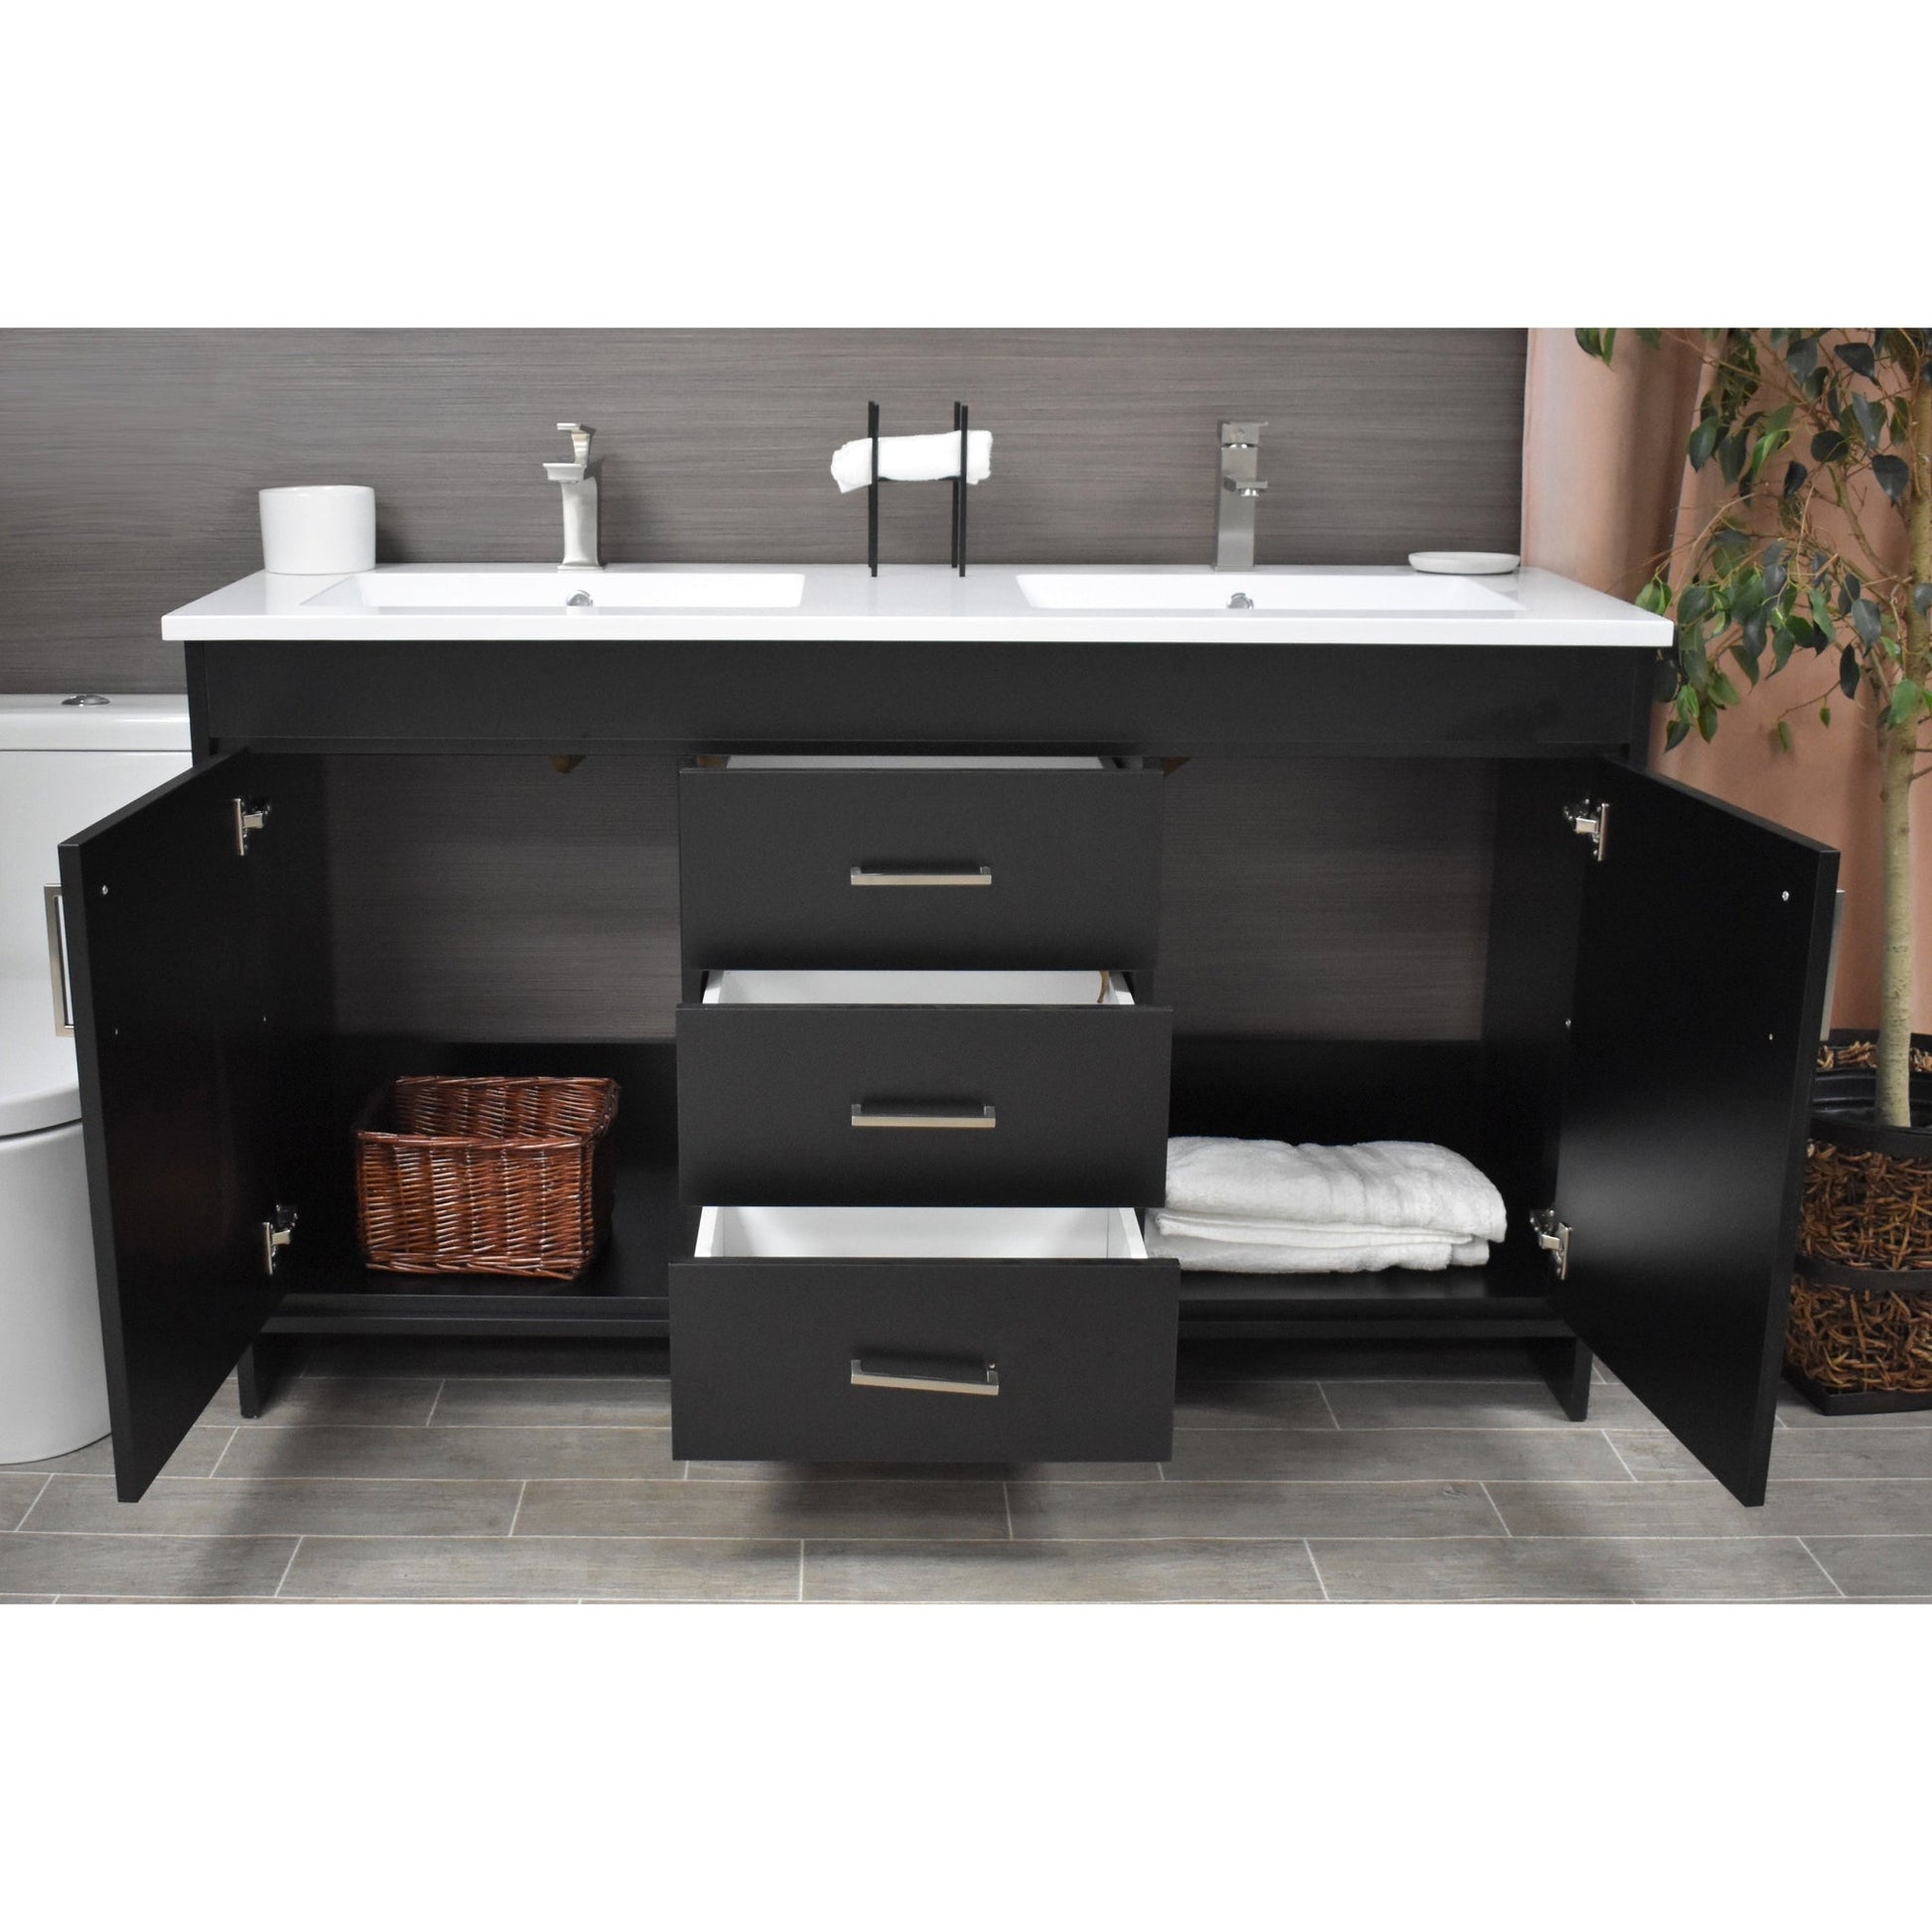 Volpa USA Rio 60" Black Freestanding Modern Bathroom Vanity With Integrated Acrylic Double Sink Top and Brushed Nickel Handles